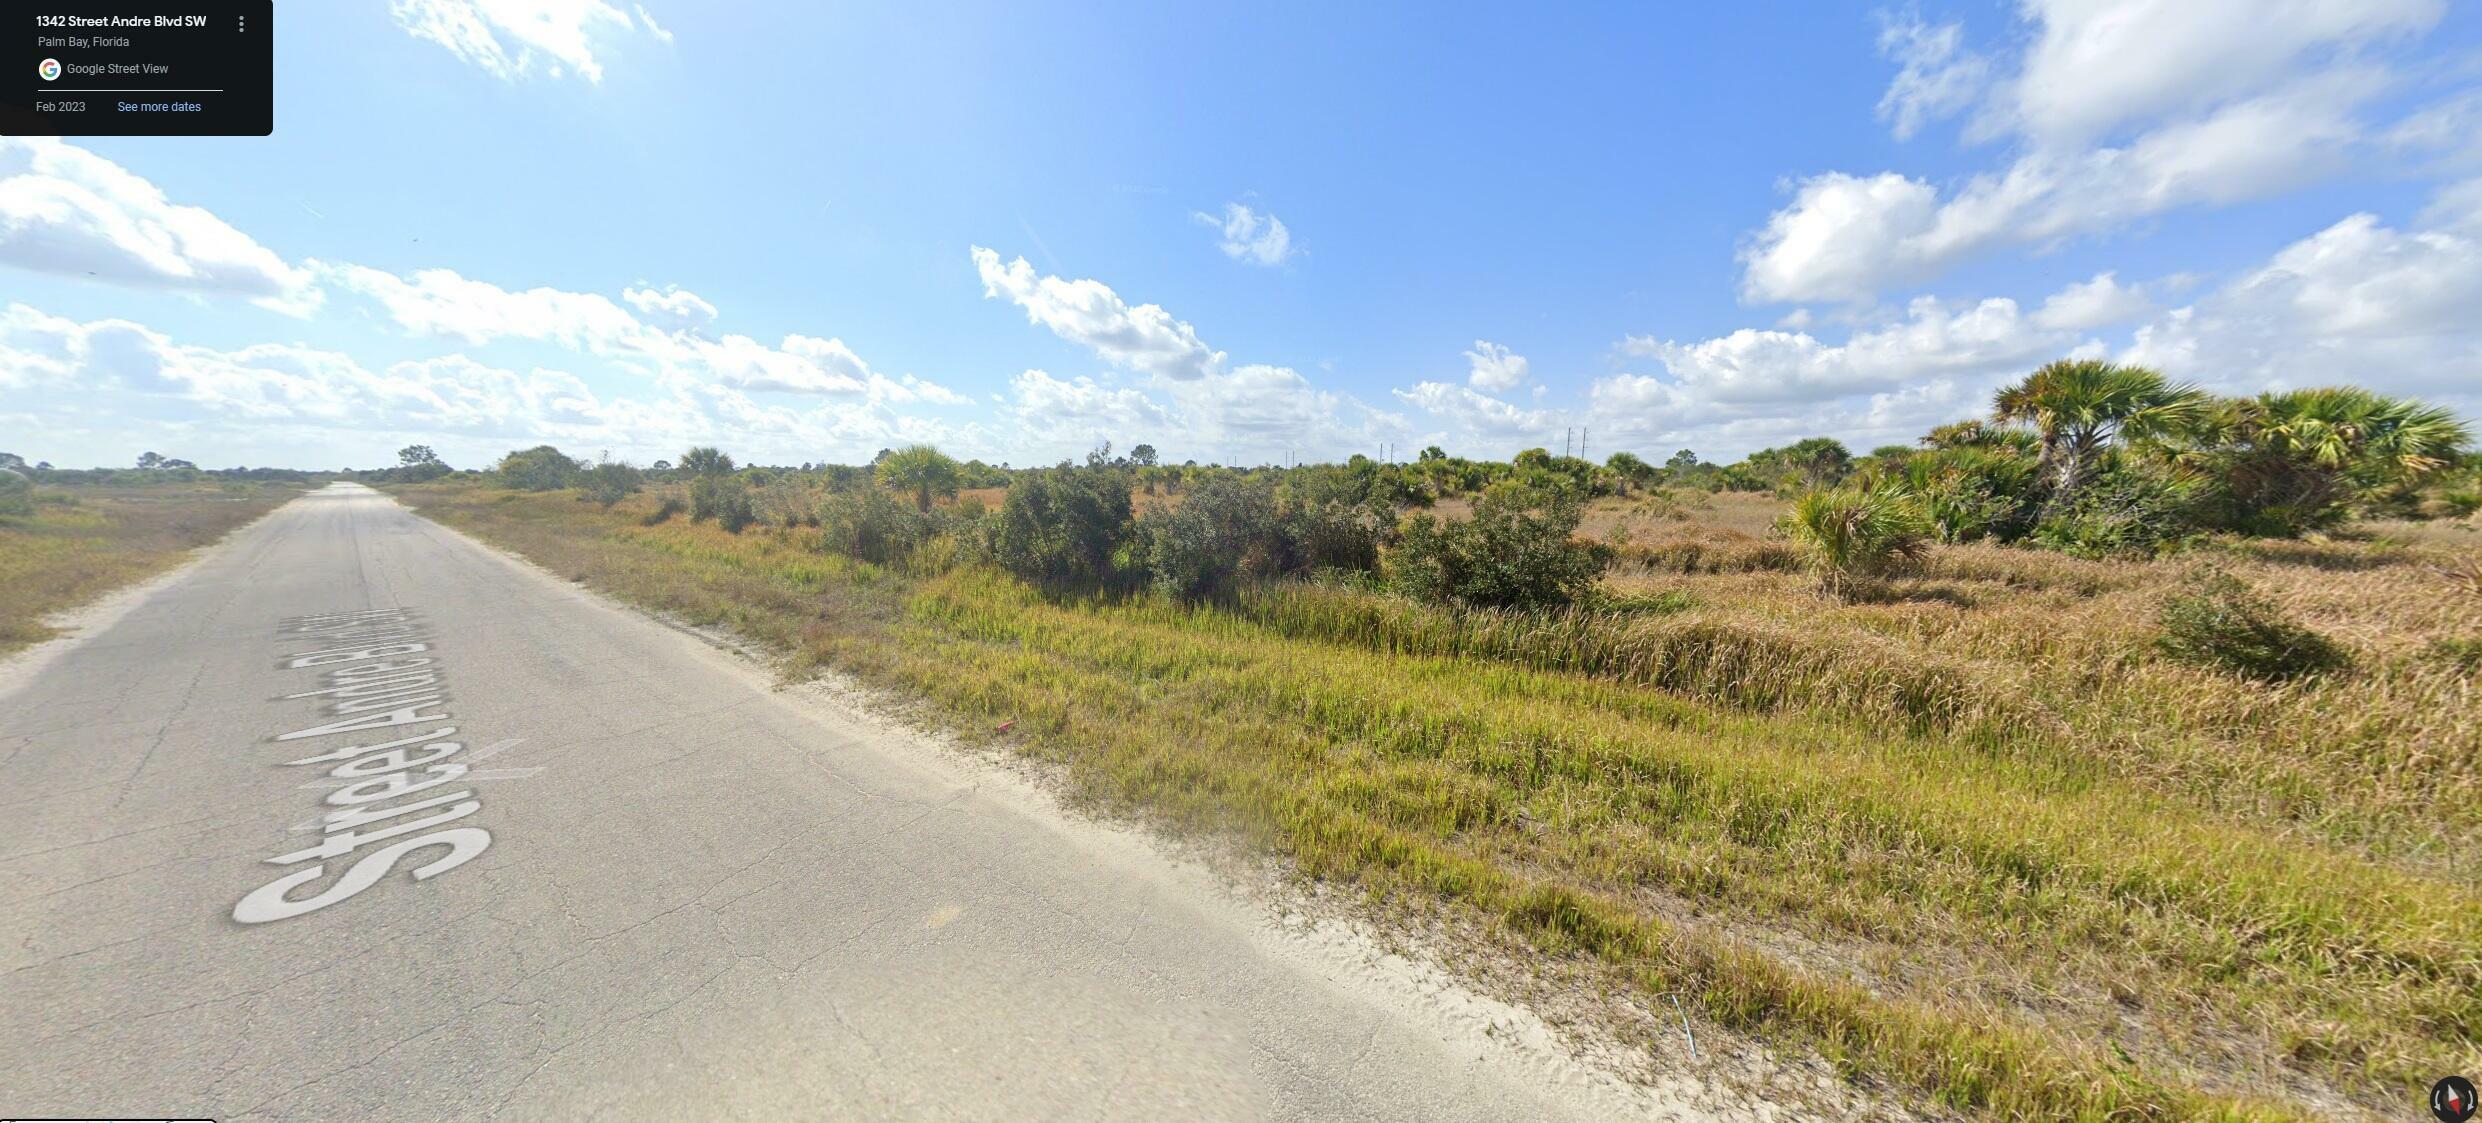 Property Photo:  1342 St Andre + 92 Other Lots Boulevard SW  FL 32908 